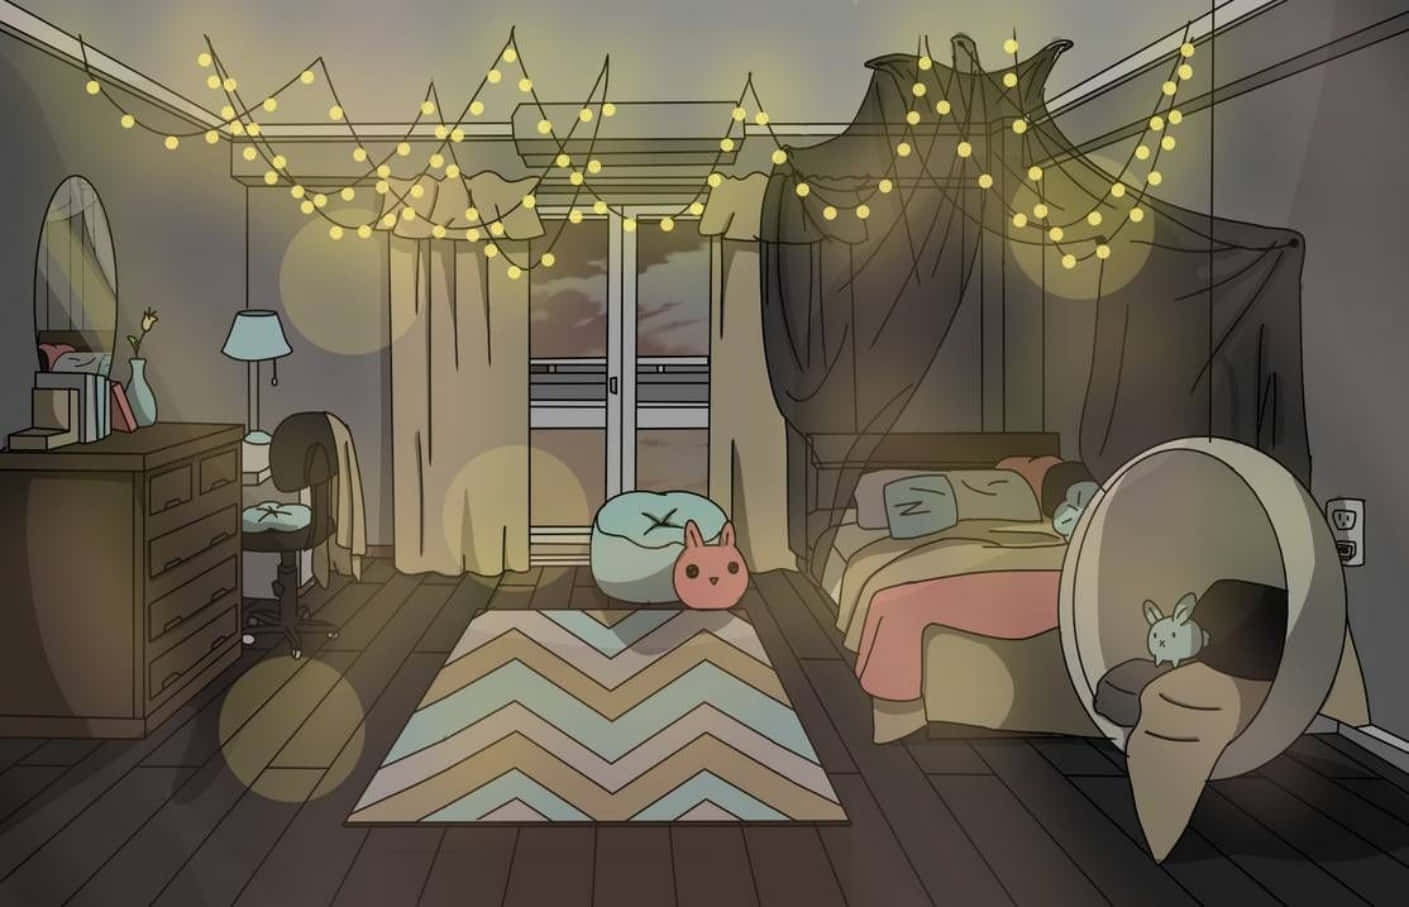 A cozy yet vibrant anime-inspired room